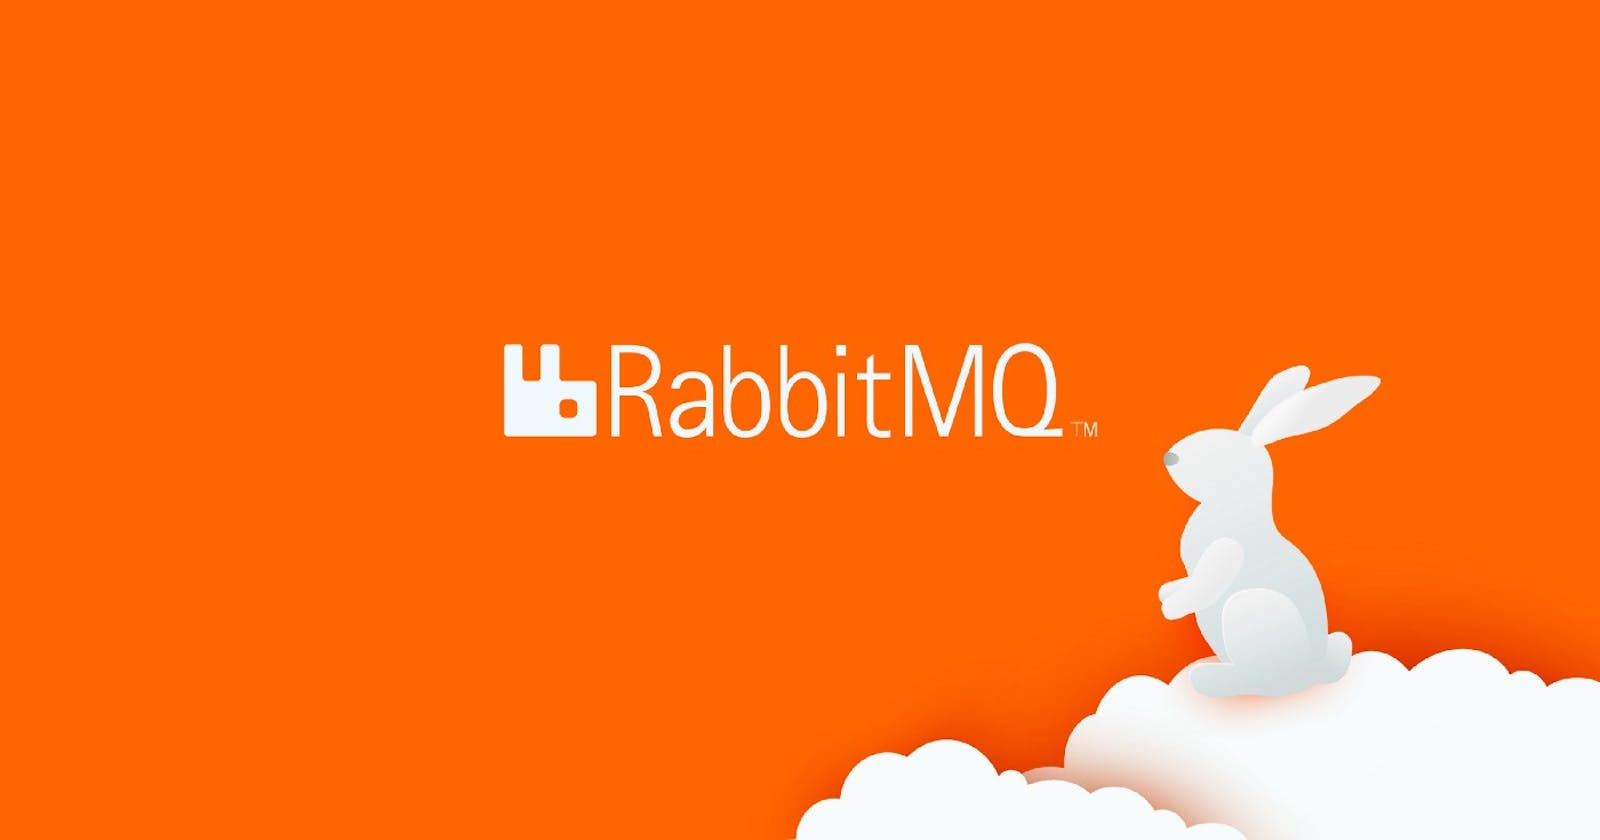 How to Setting Up RabbitMQ on Windows?